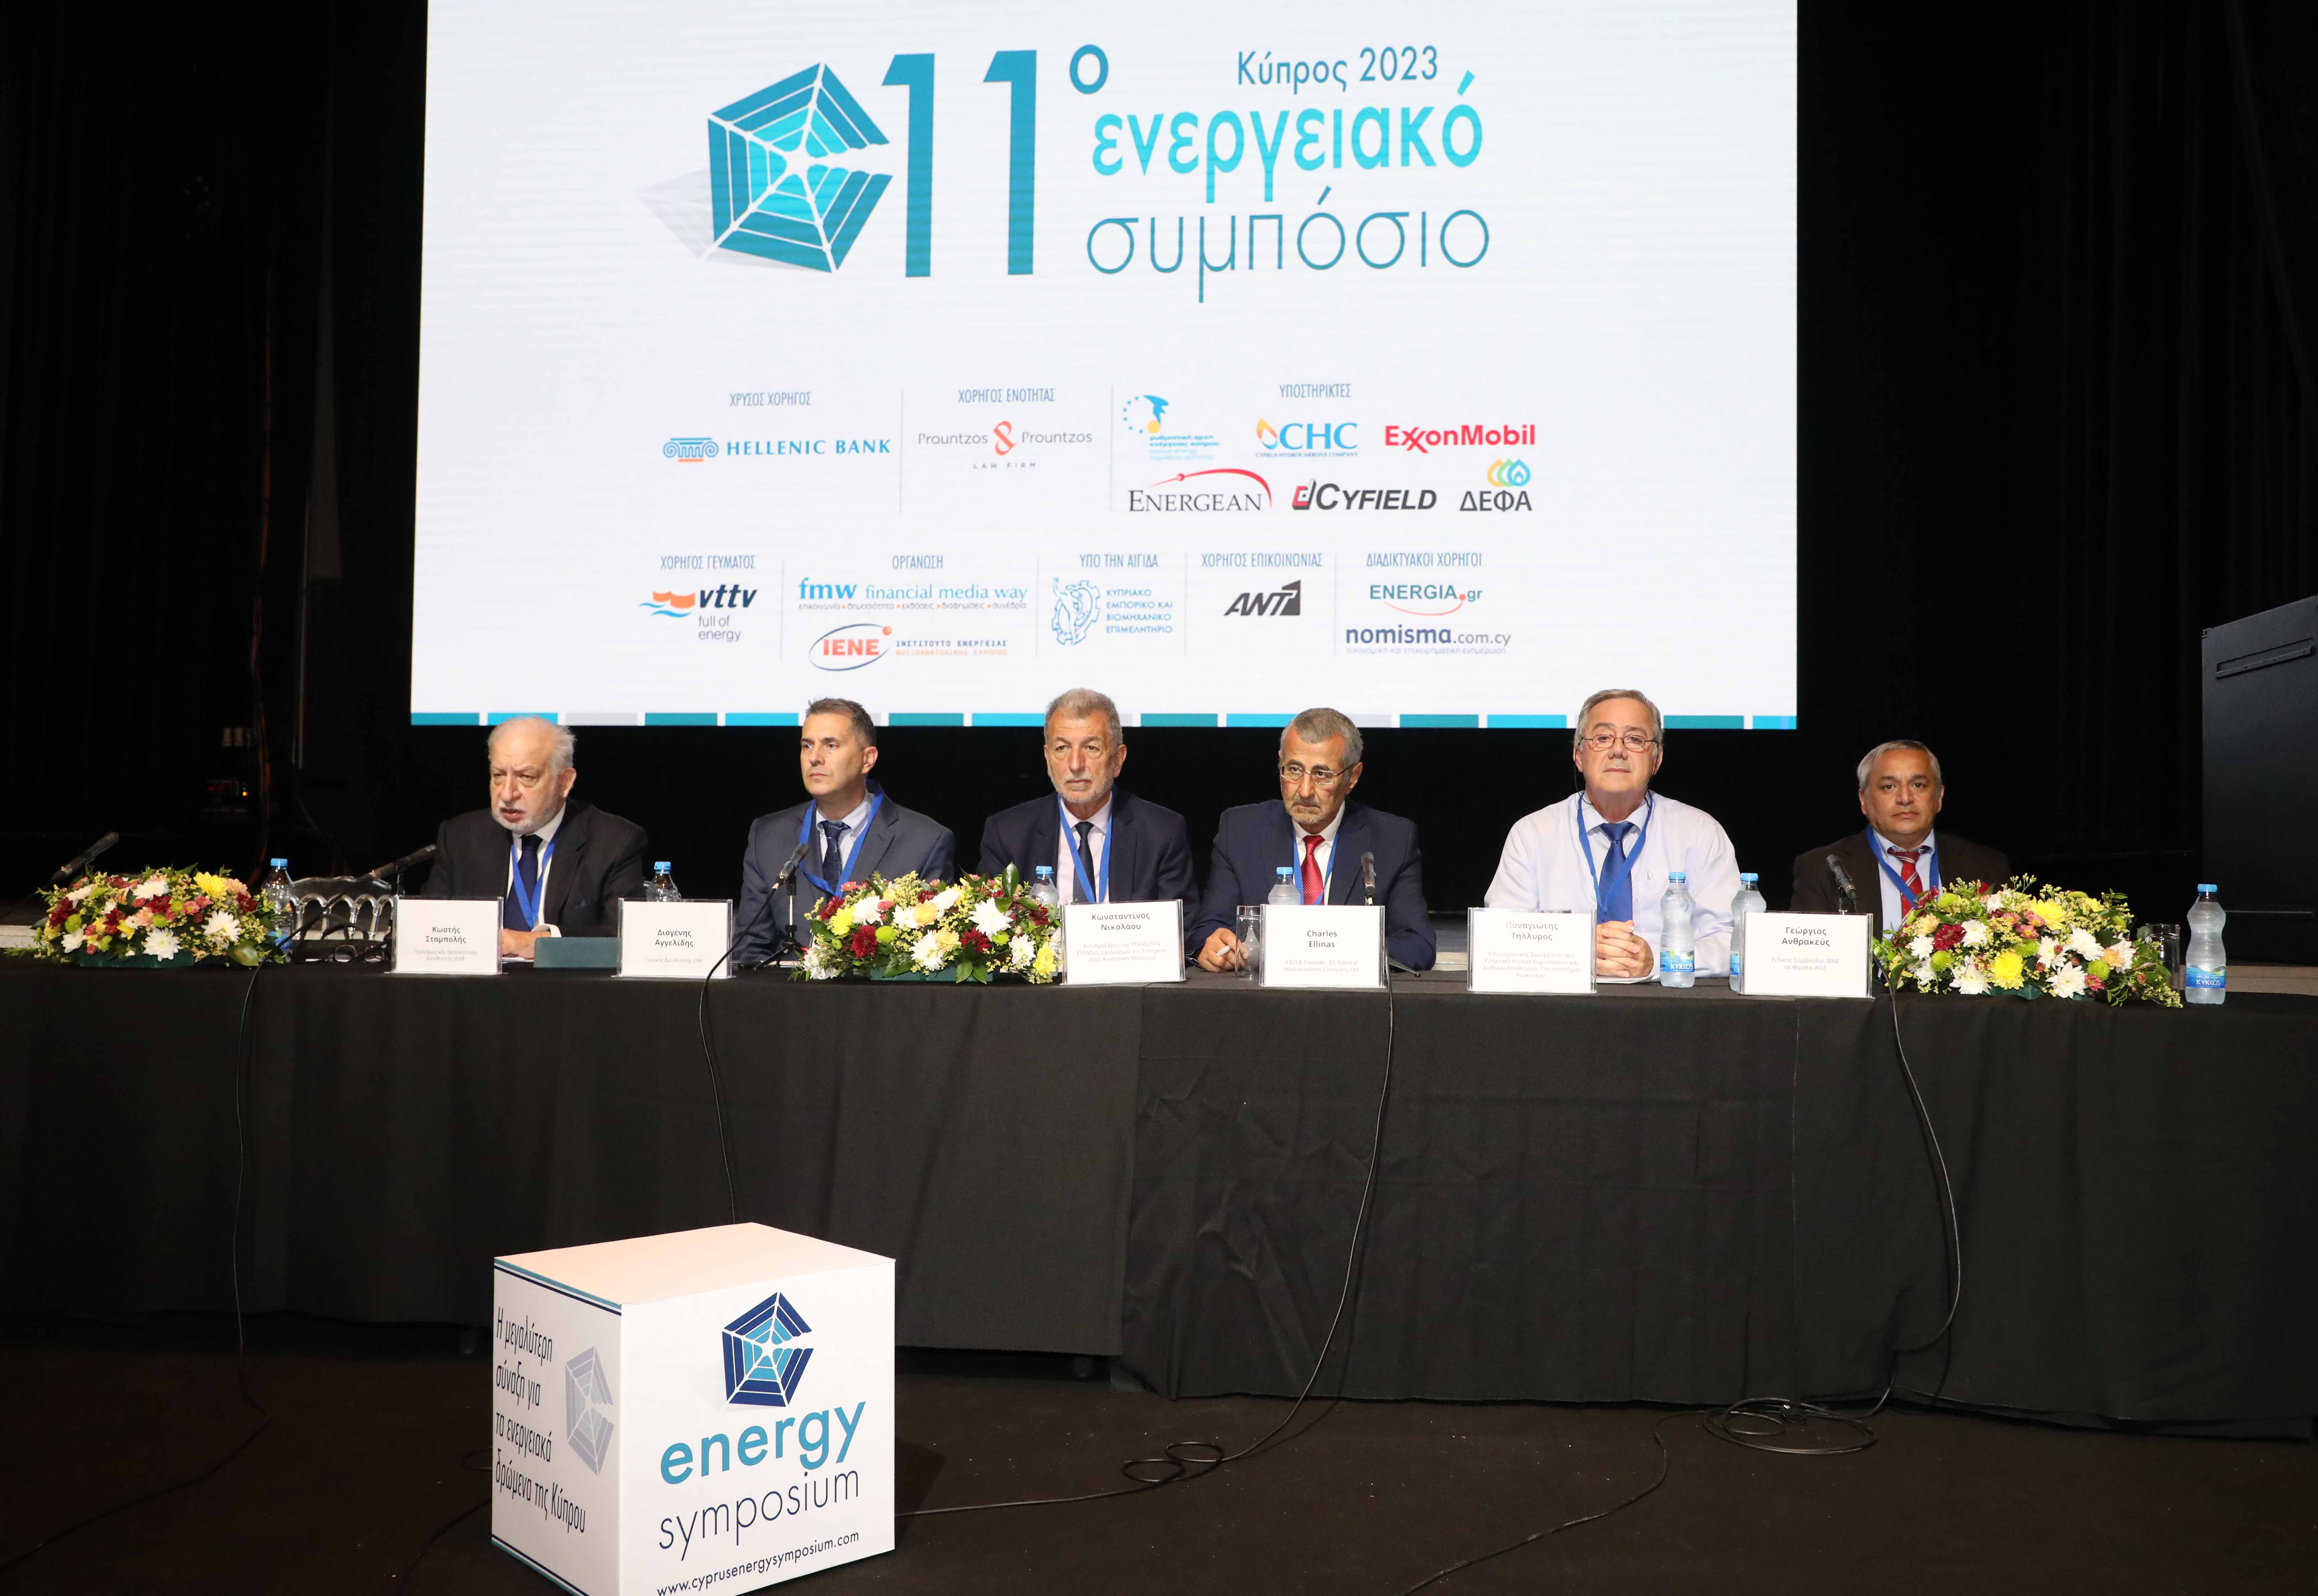 The 11th Cyprus Energy Symposium Urged the Implementation of New Infrastructure Projects